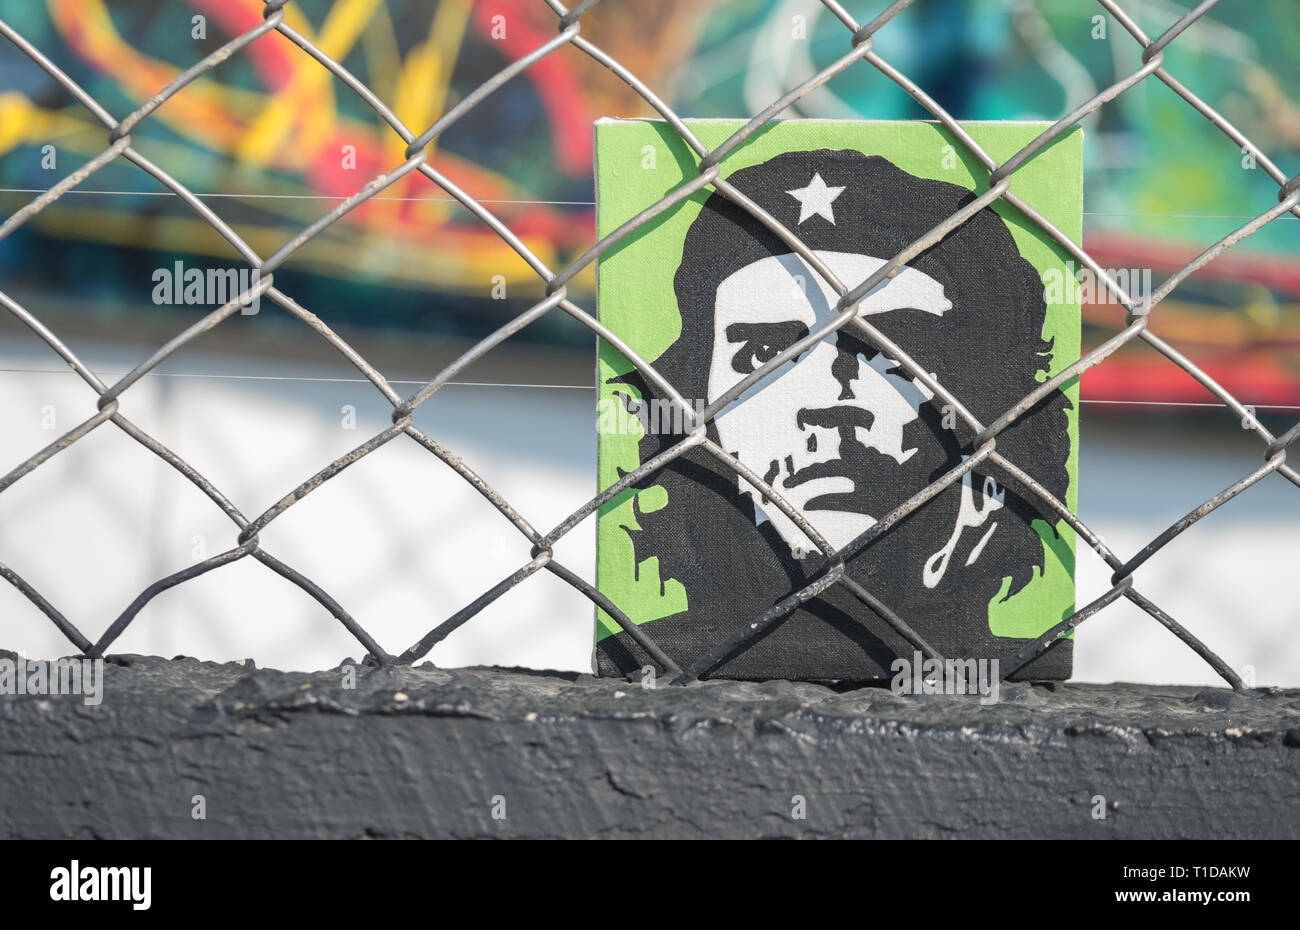 A small painting of Ché Guevara sits behind a chainlink fence. He was known as one of the guerrilla leaders during the Cuban revolution. Stock Photo